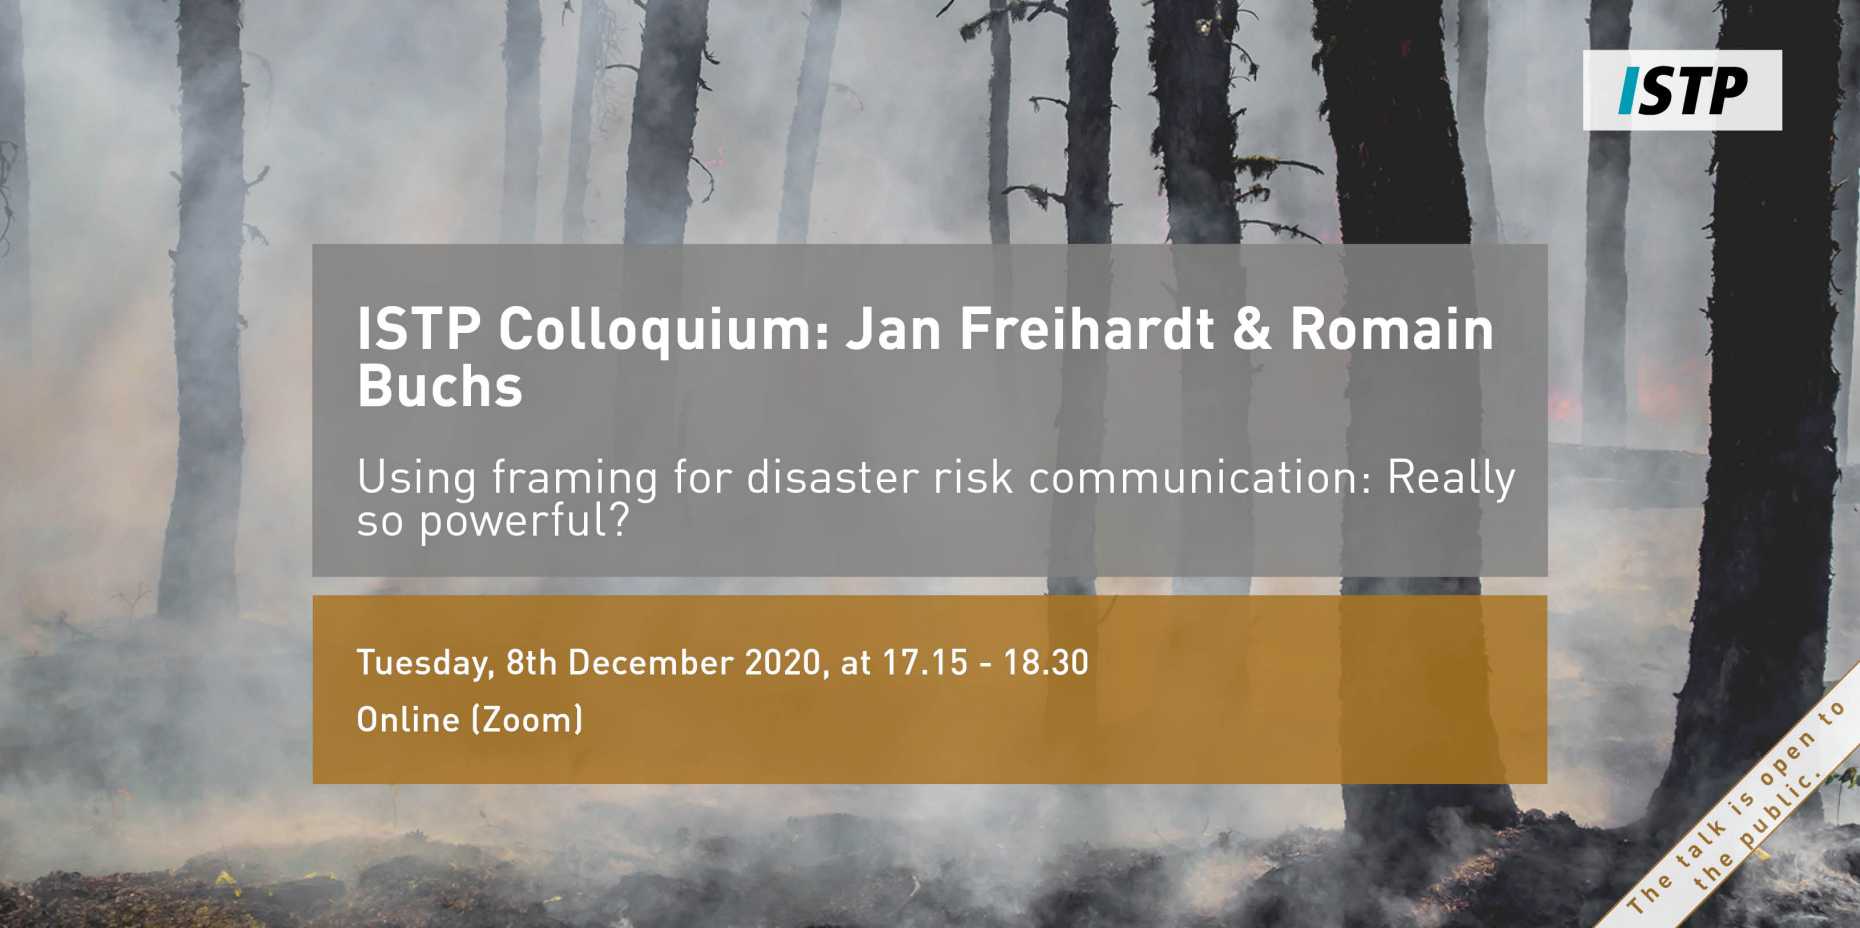 ISTP Colloquium: Using framing for disaster risk communication: Really so powerful?